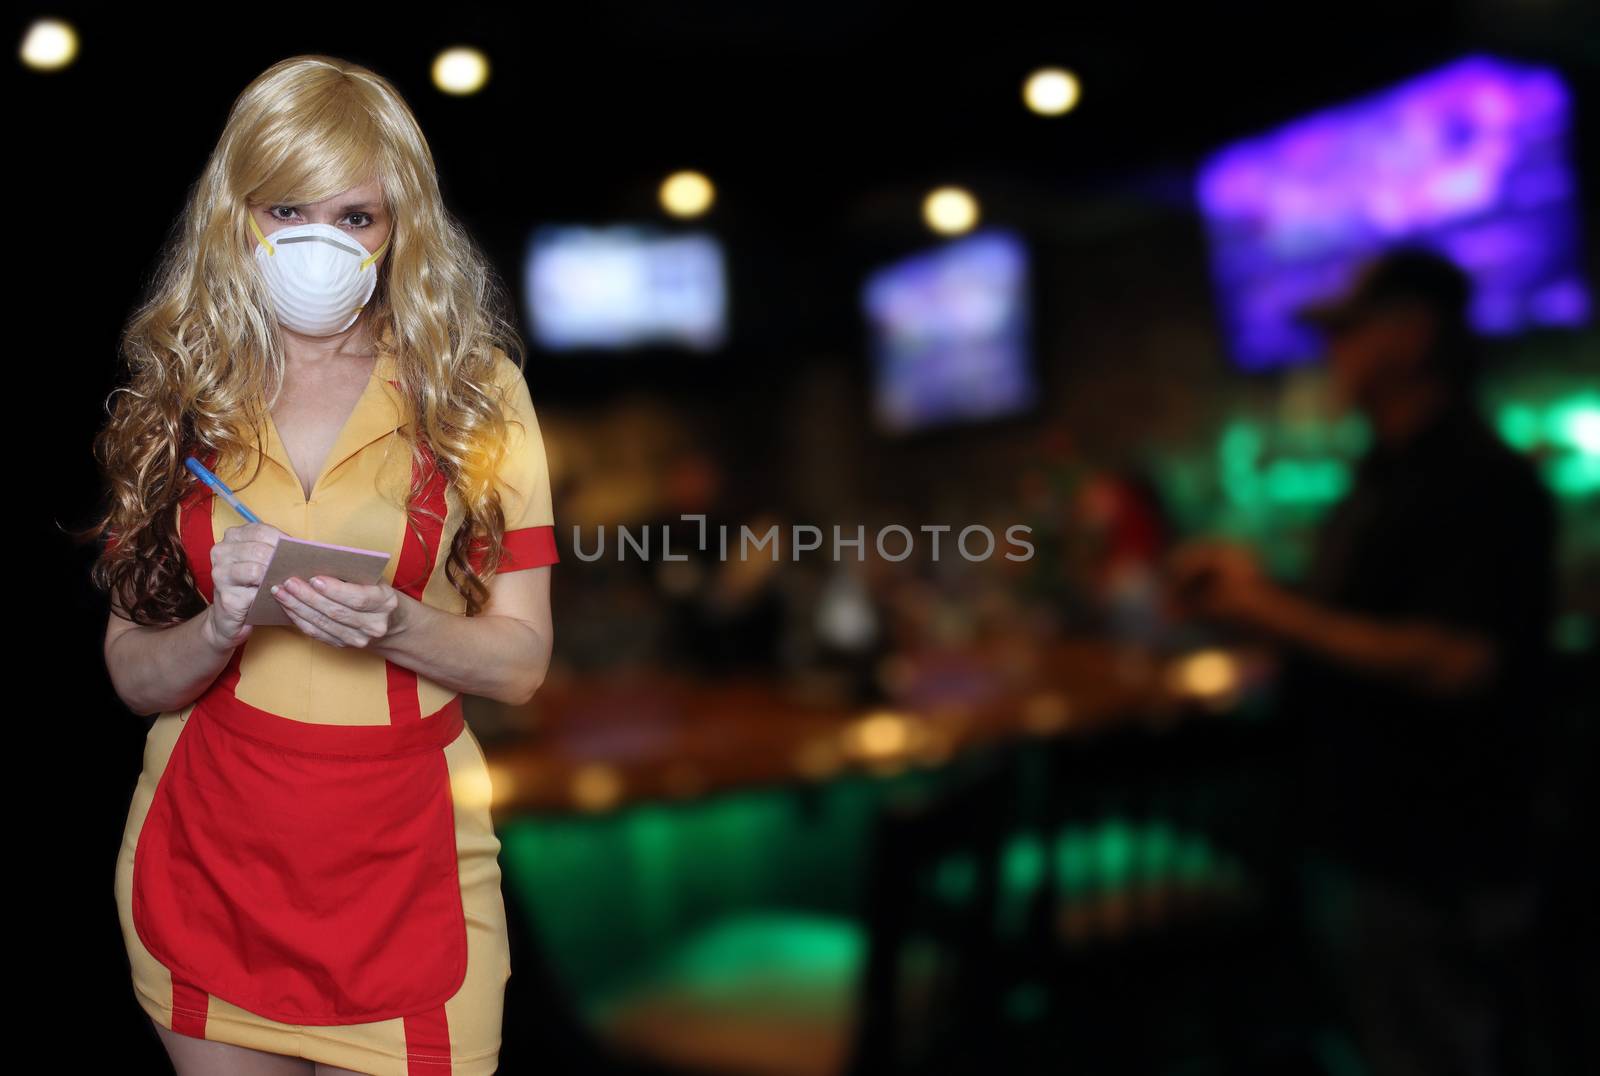 Waitress With N95 Mask To Prevent Illness by Marti157900